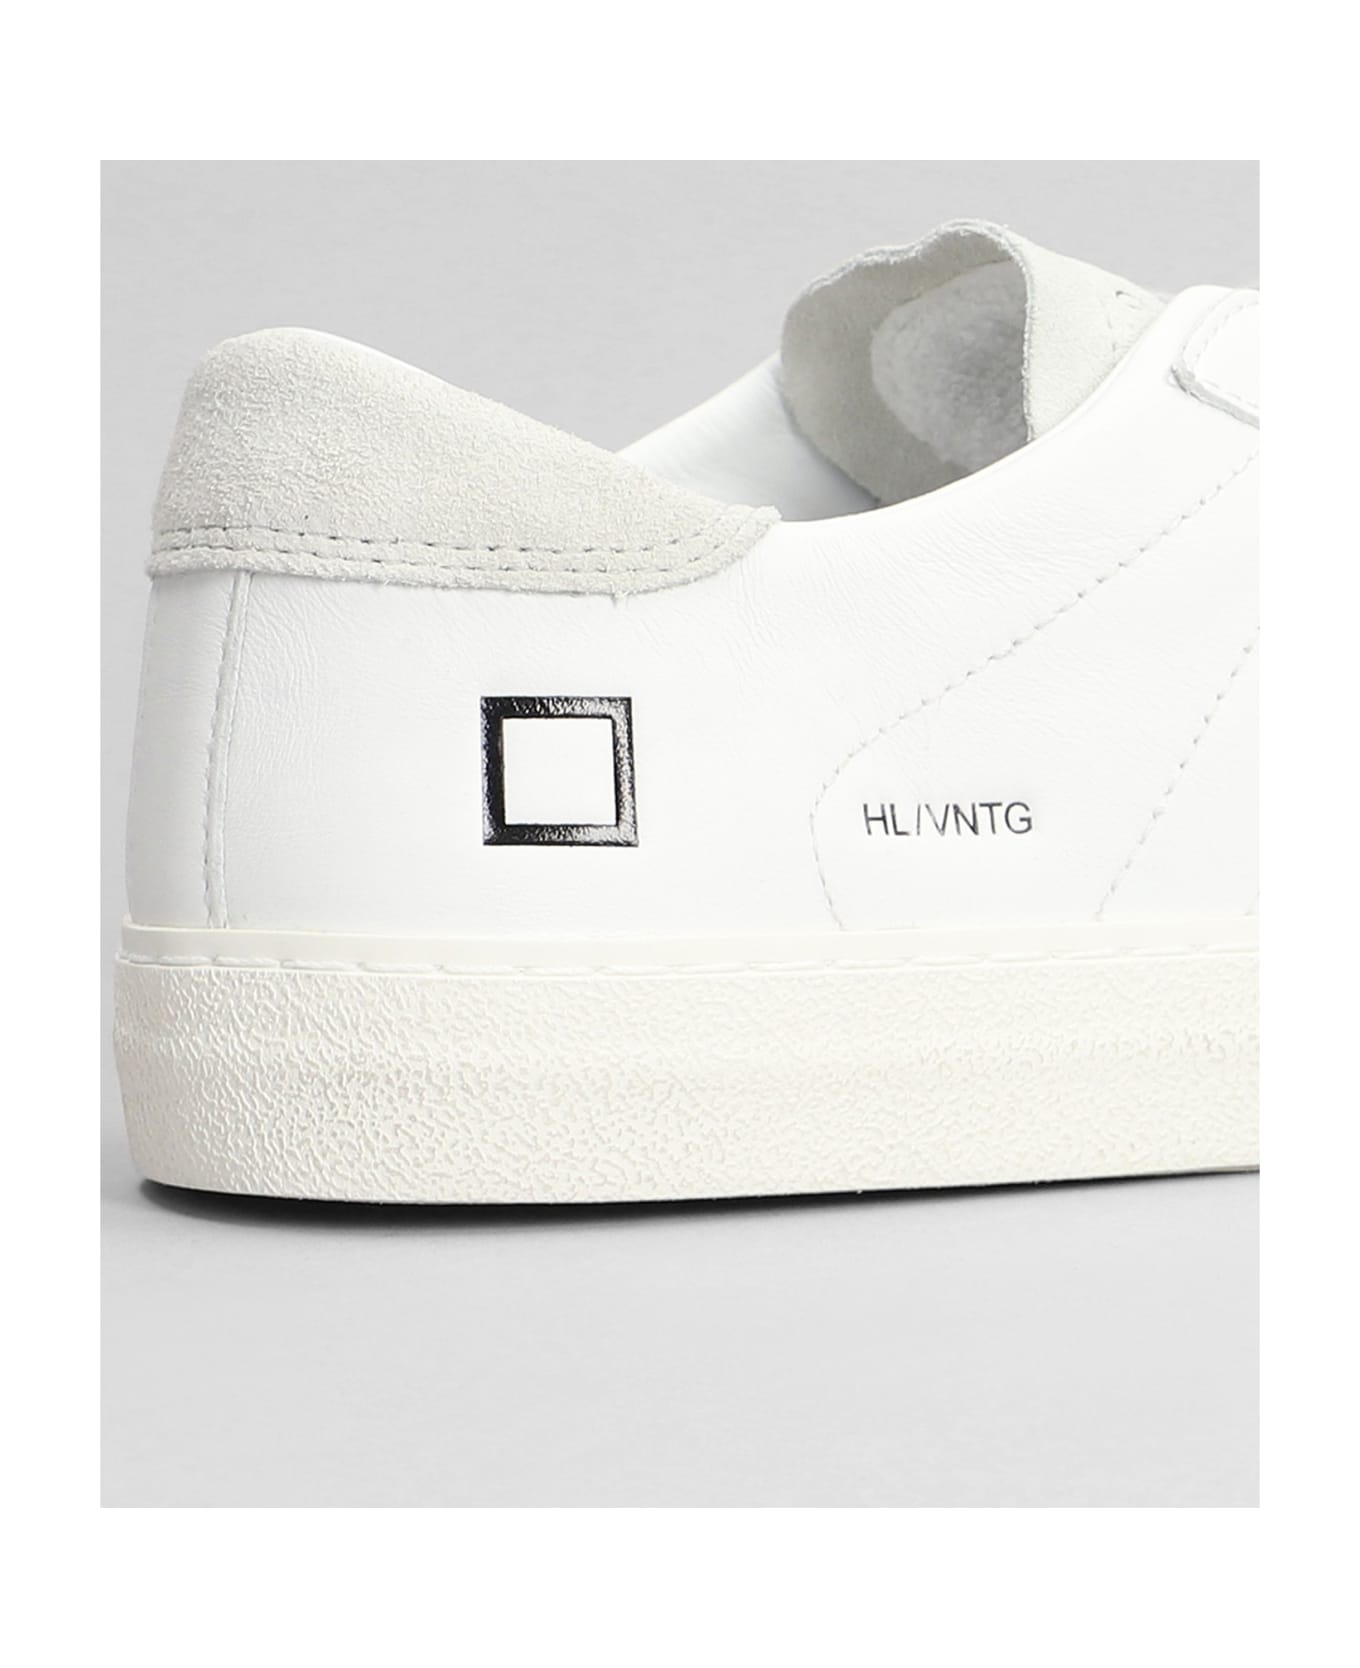 D.A.T.E. Hill Low Sneakers In White Suede And Leather - white スニーカー